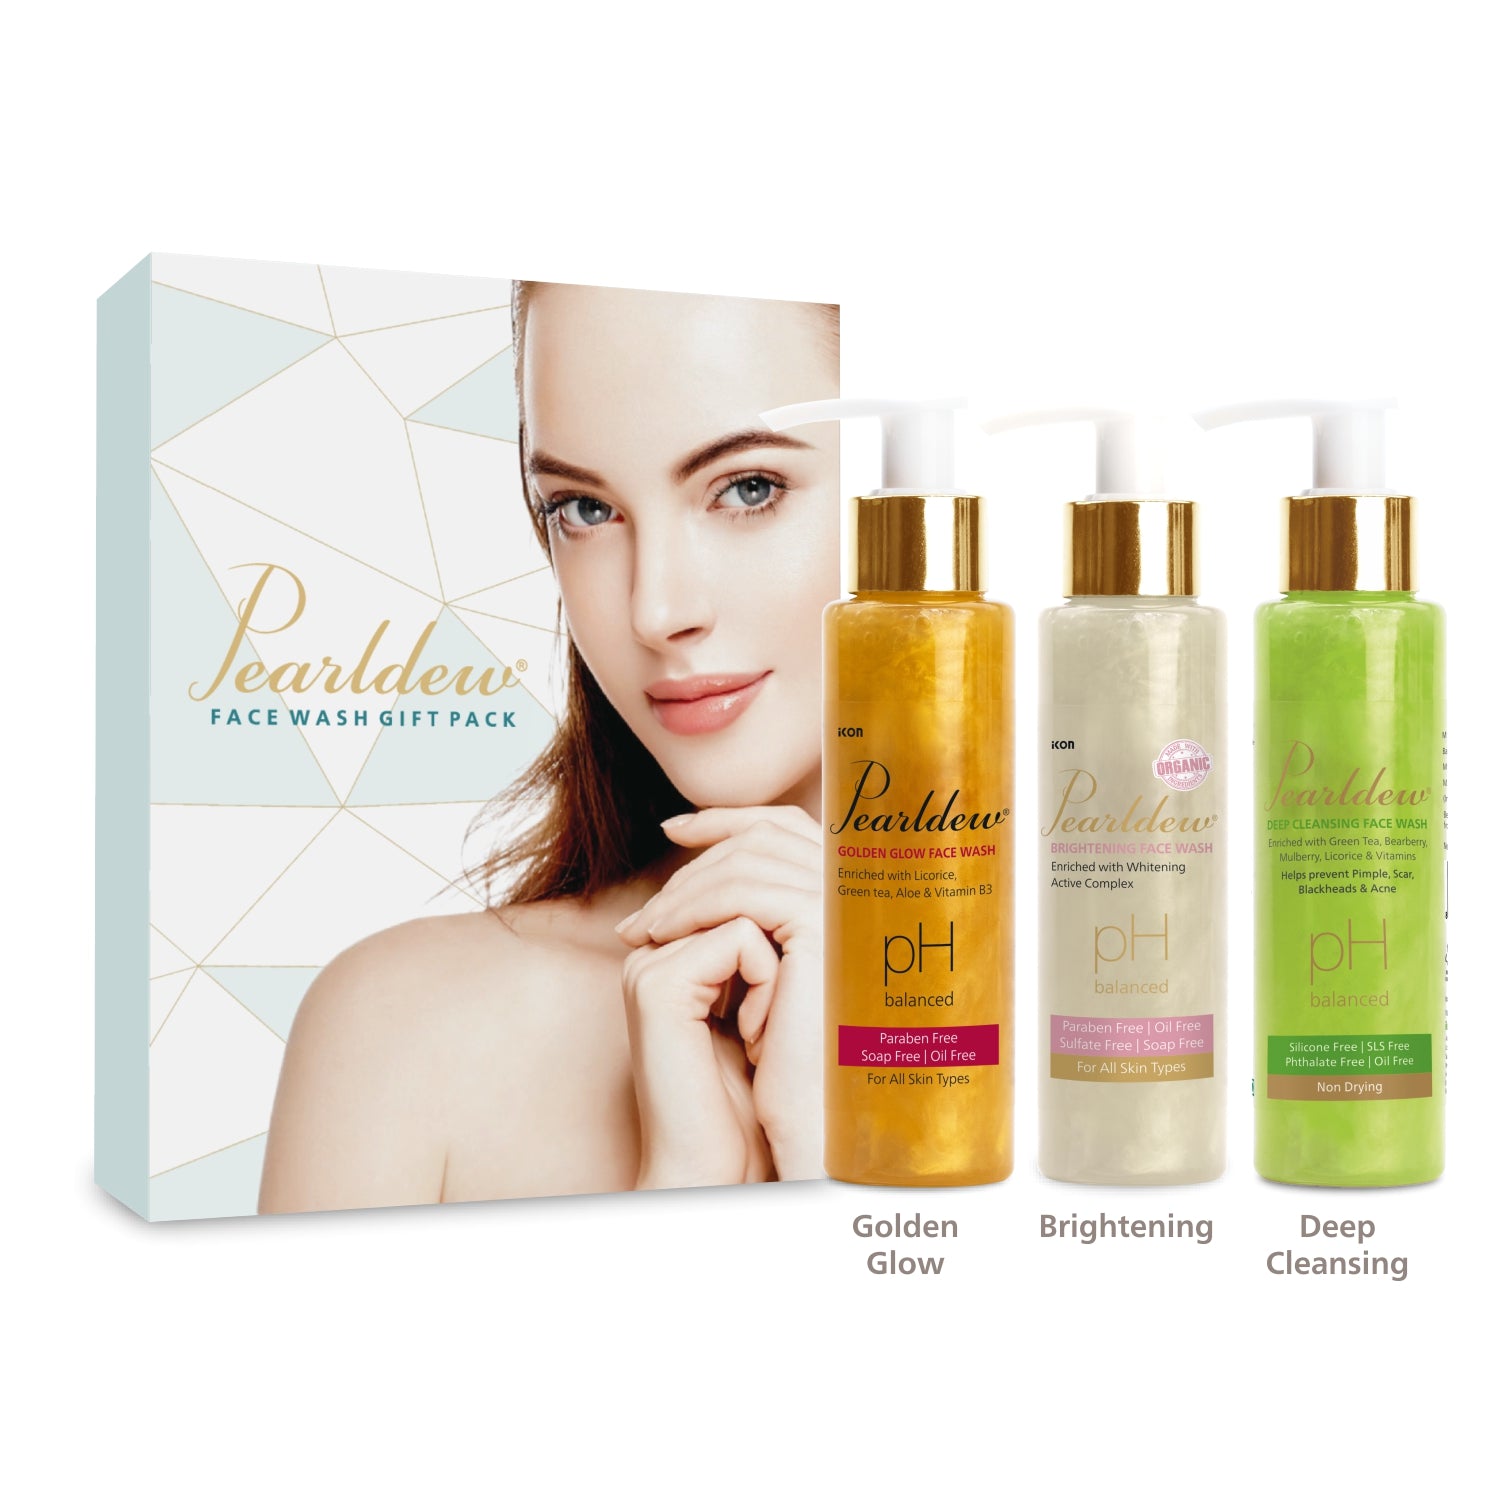 Pearldew Face Wash [Gift Pack of 3]